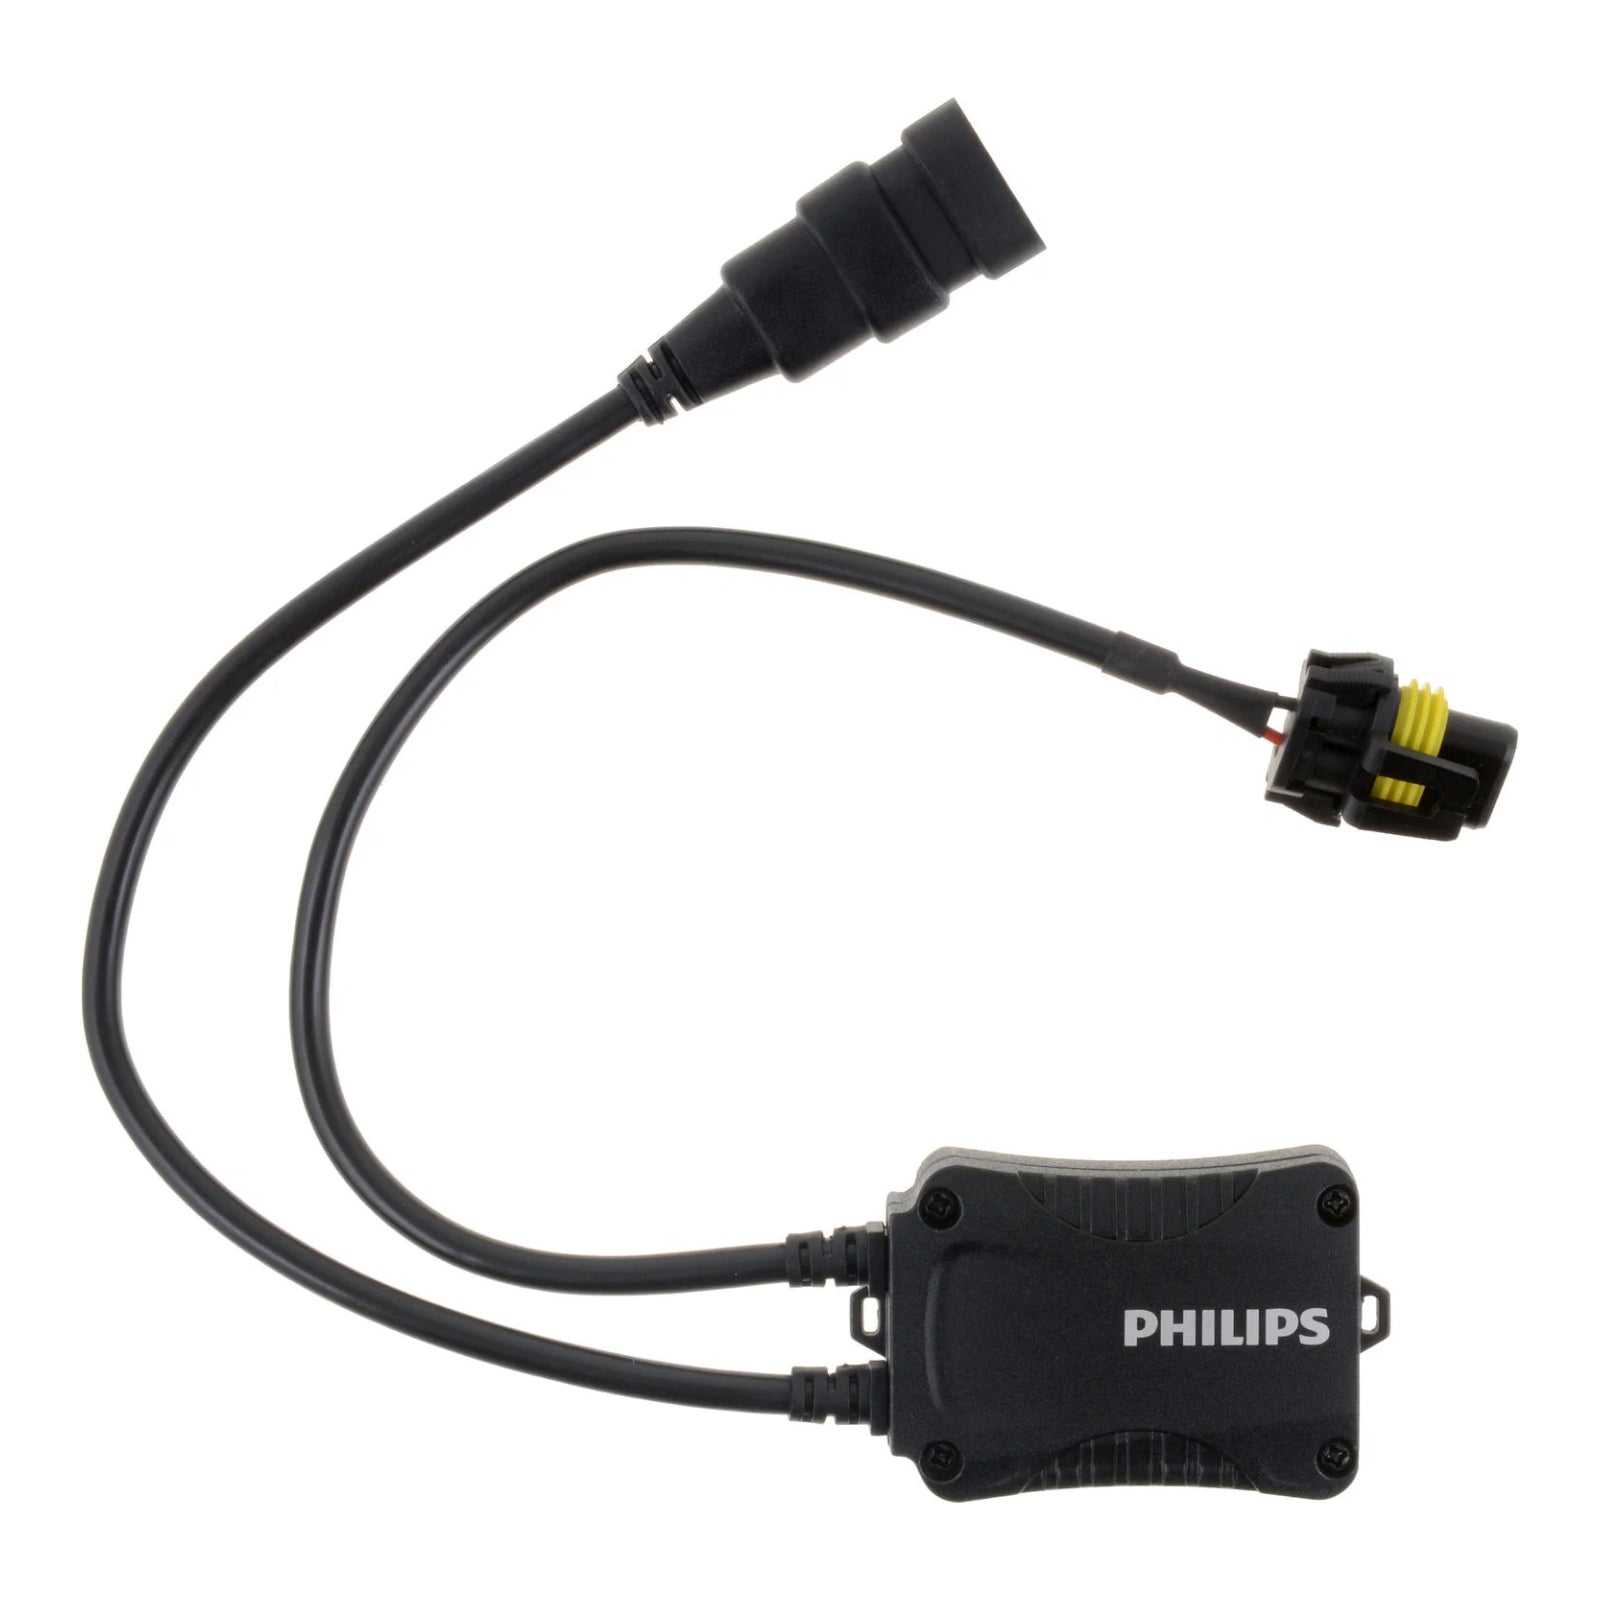 Philips, Philips CANbus CEA HB3/HB4/HIR2 18956 12V